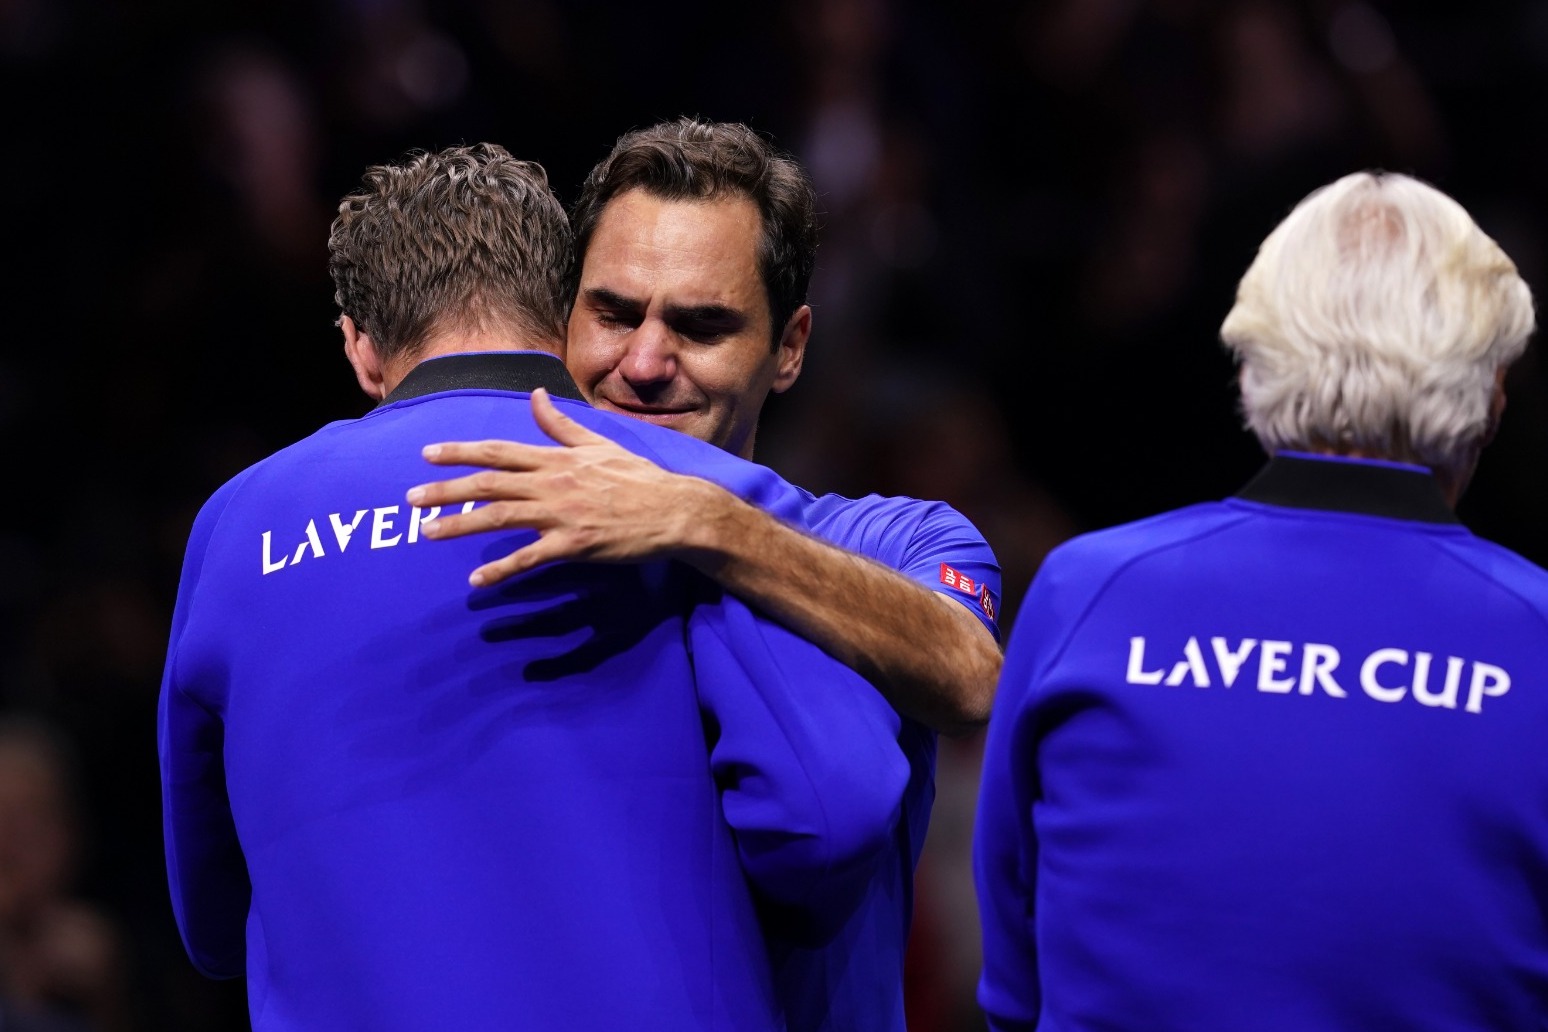 Roger Federer brings curtain down on illustrious career with doubles defeat 